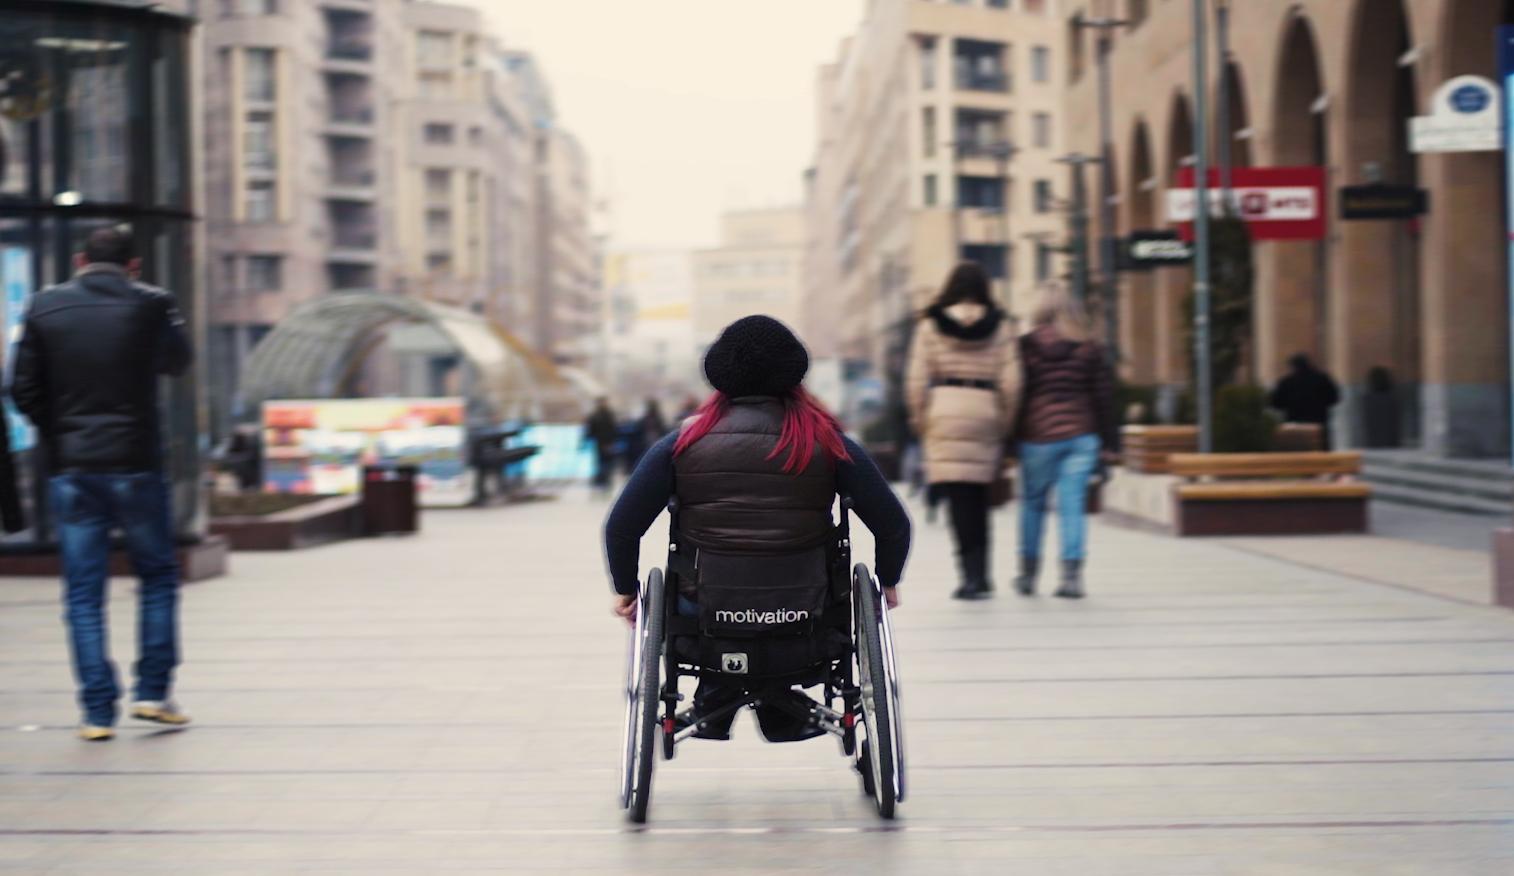 Armenians and Disabilities: We Have a Long and Painful Way to Go